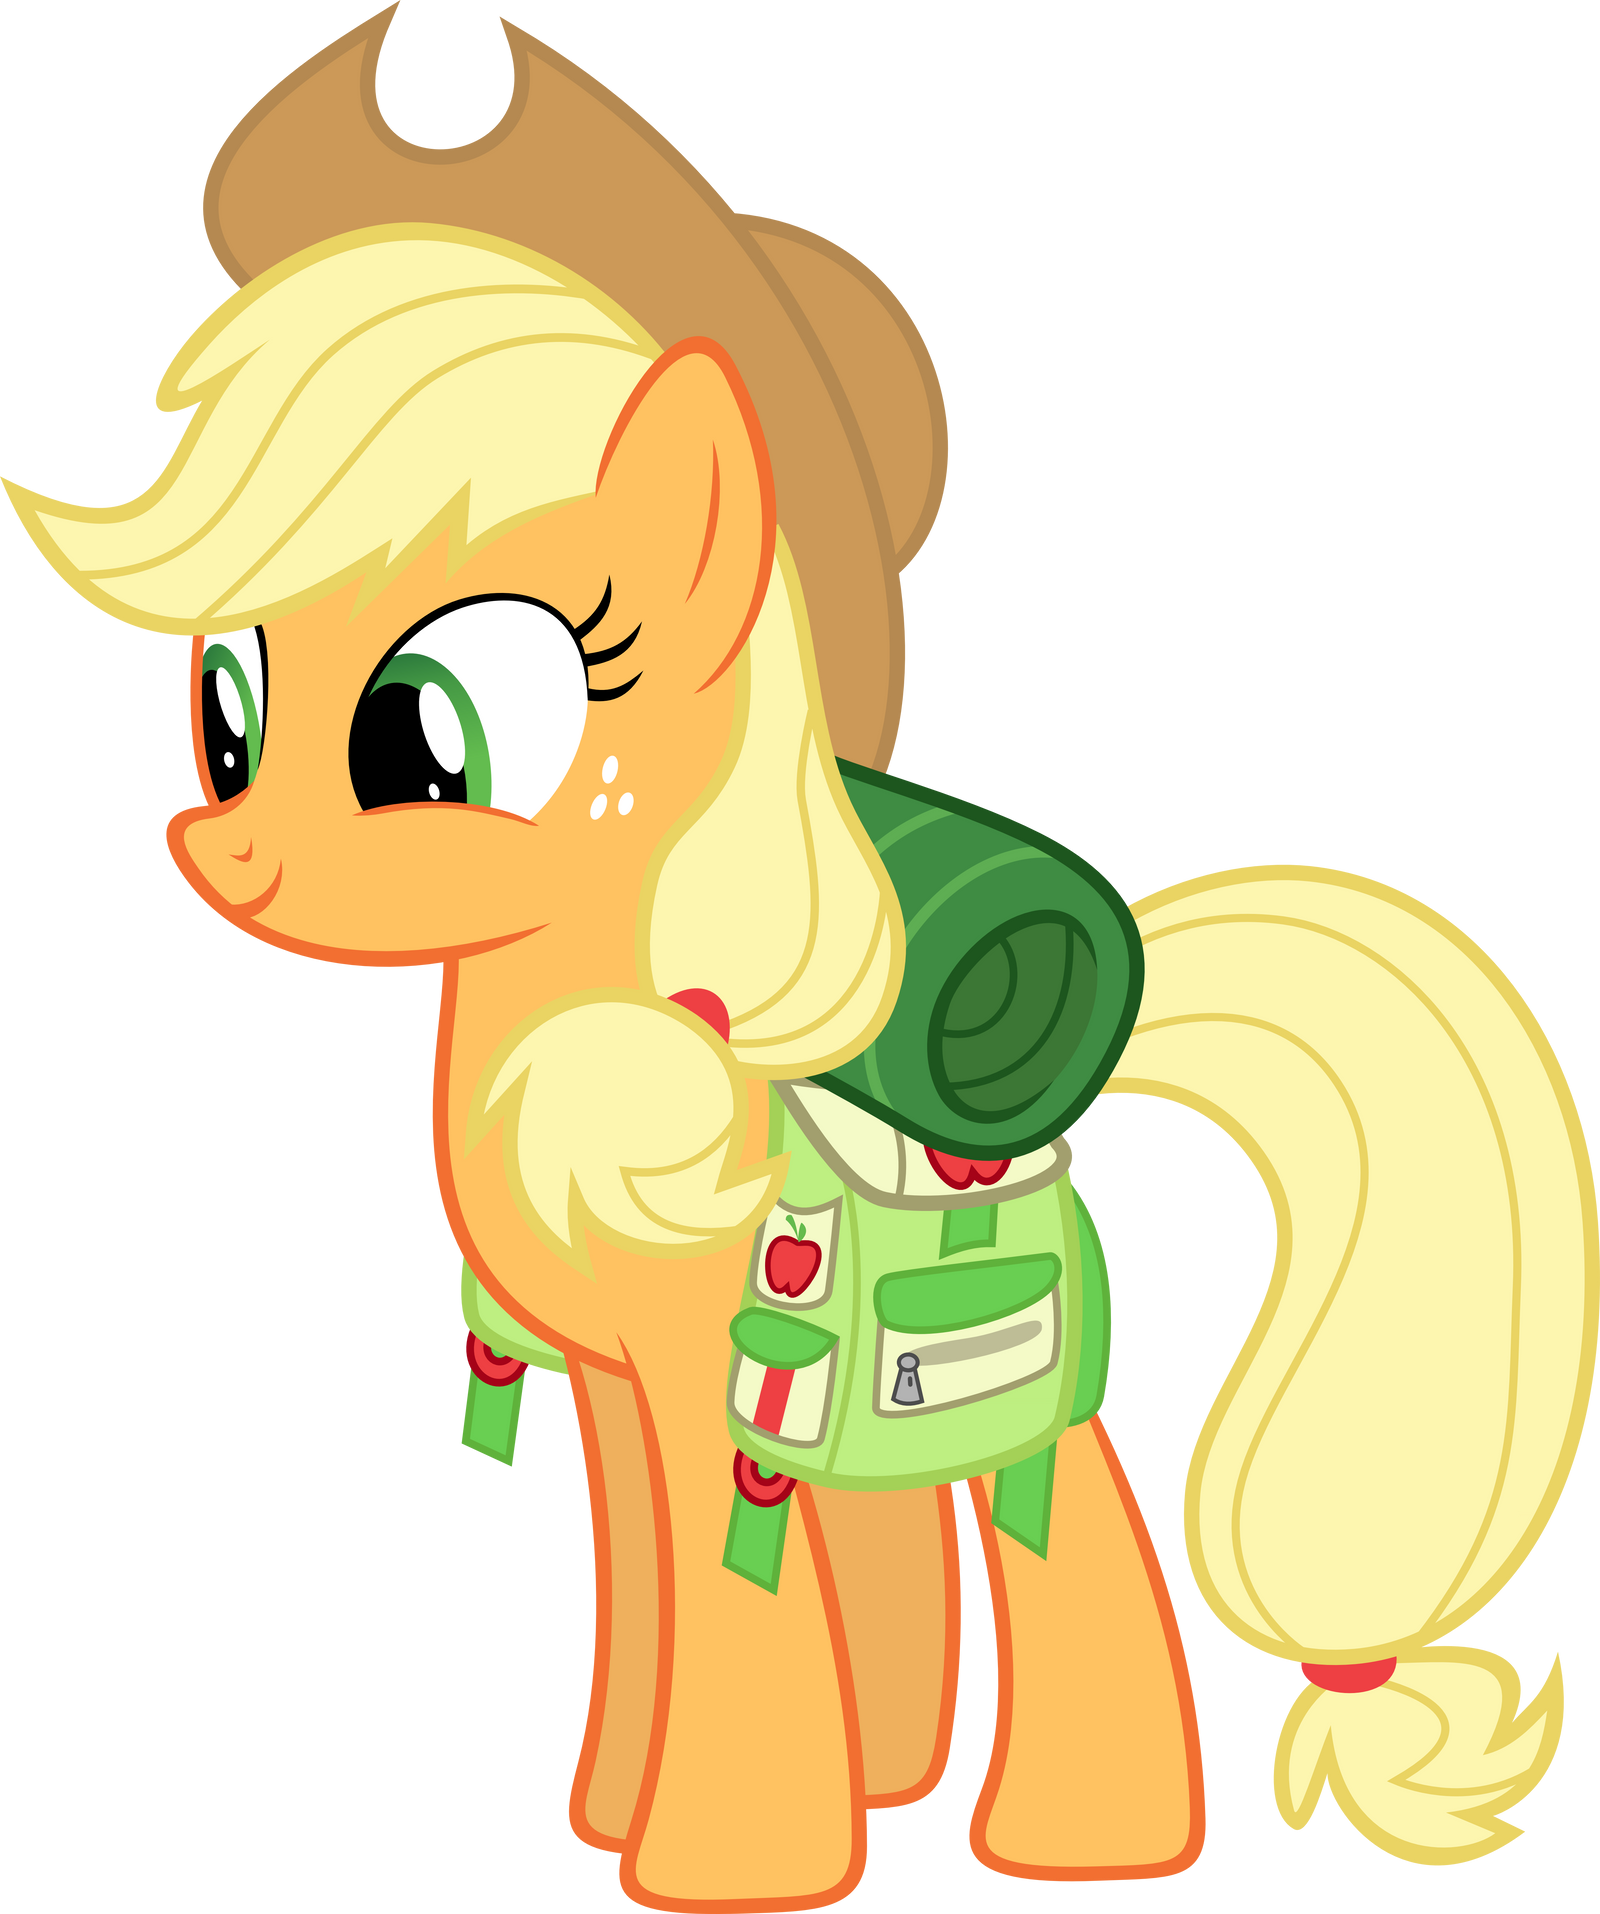 [Obrázek: applejack_with_camping_gear_by_synthrid-d5njgcw.png]